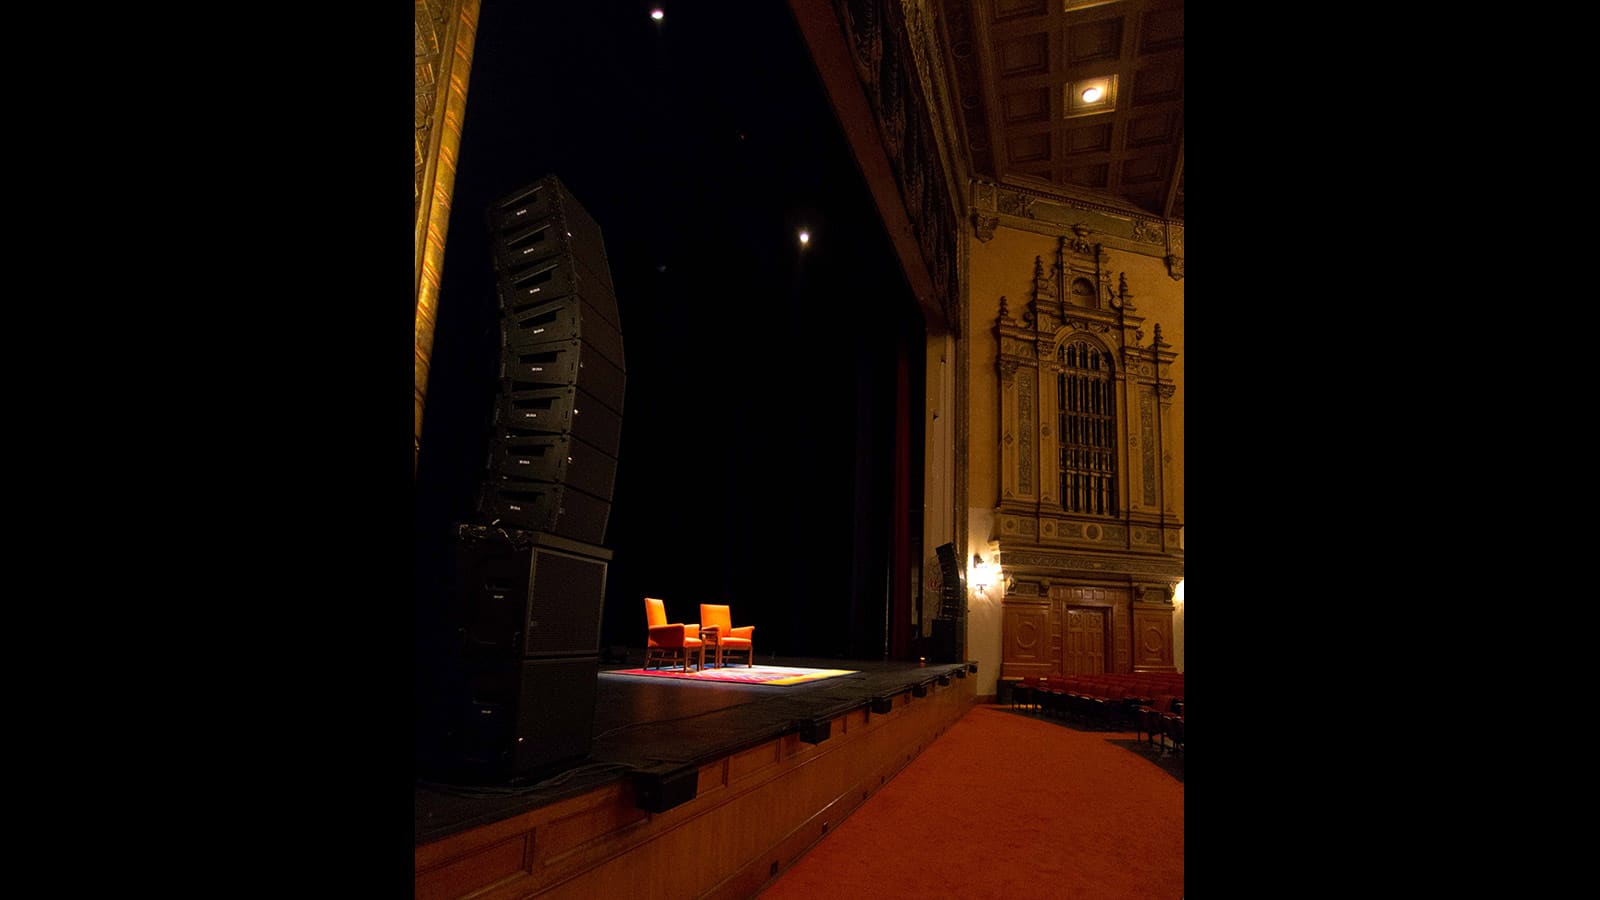 Meyer Sound MINA Brings Clarity to Great Ideas at San Francisco's Nourse Theatre